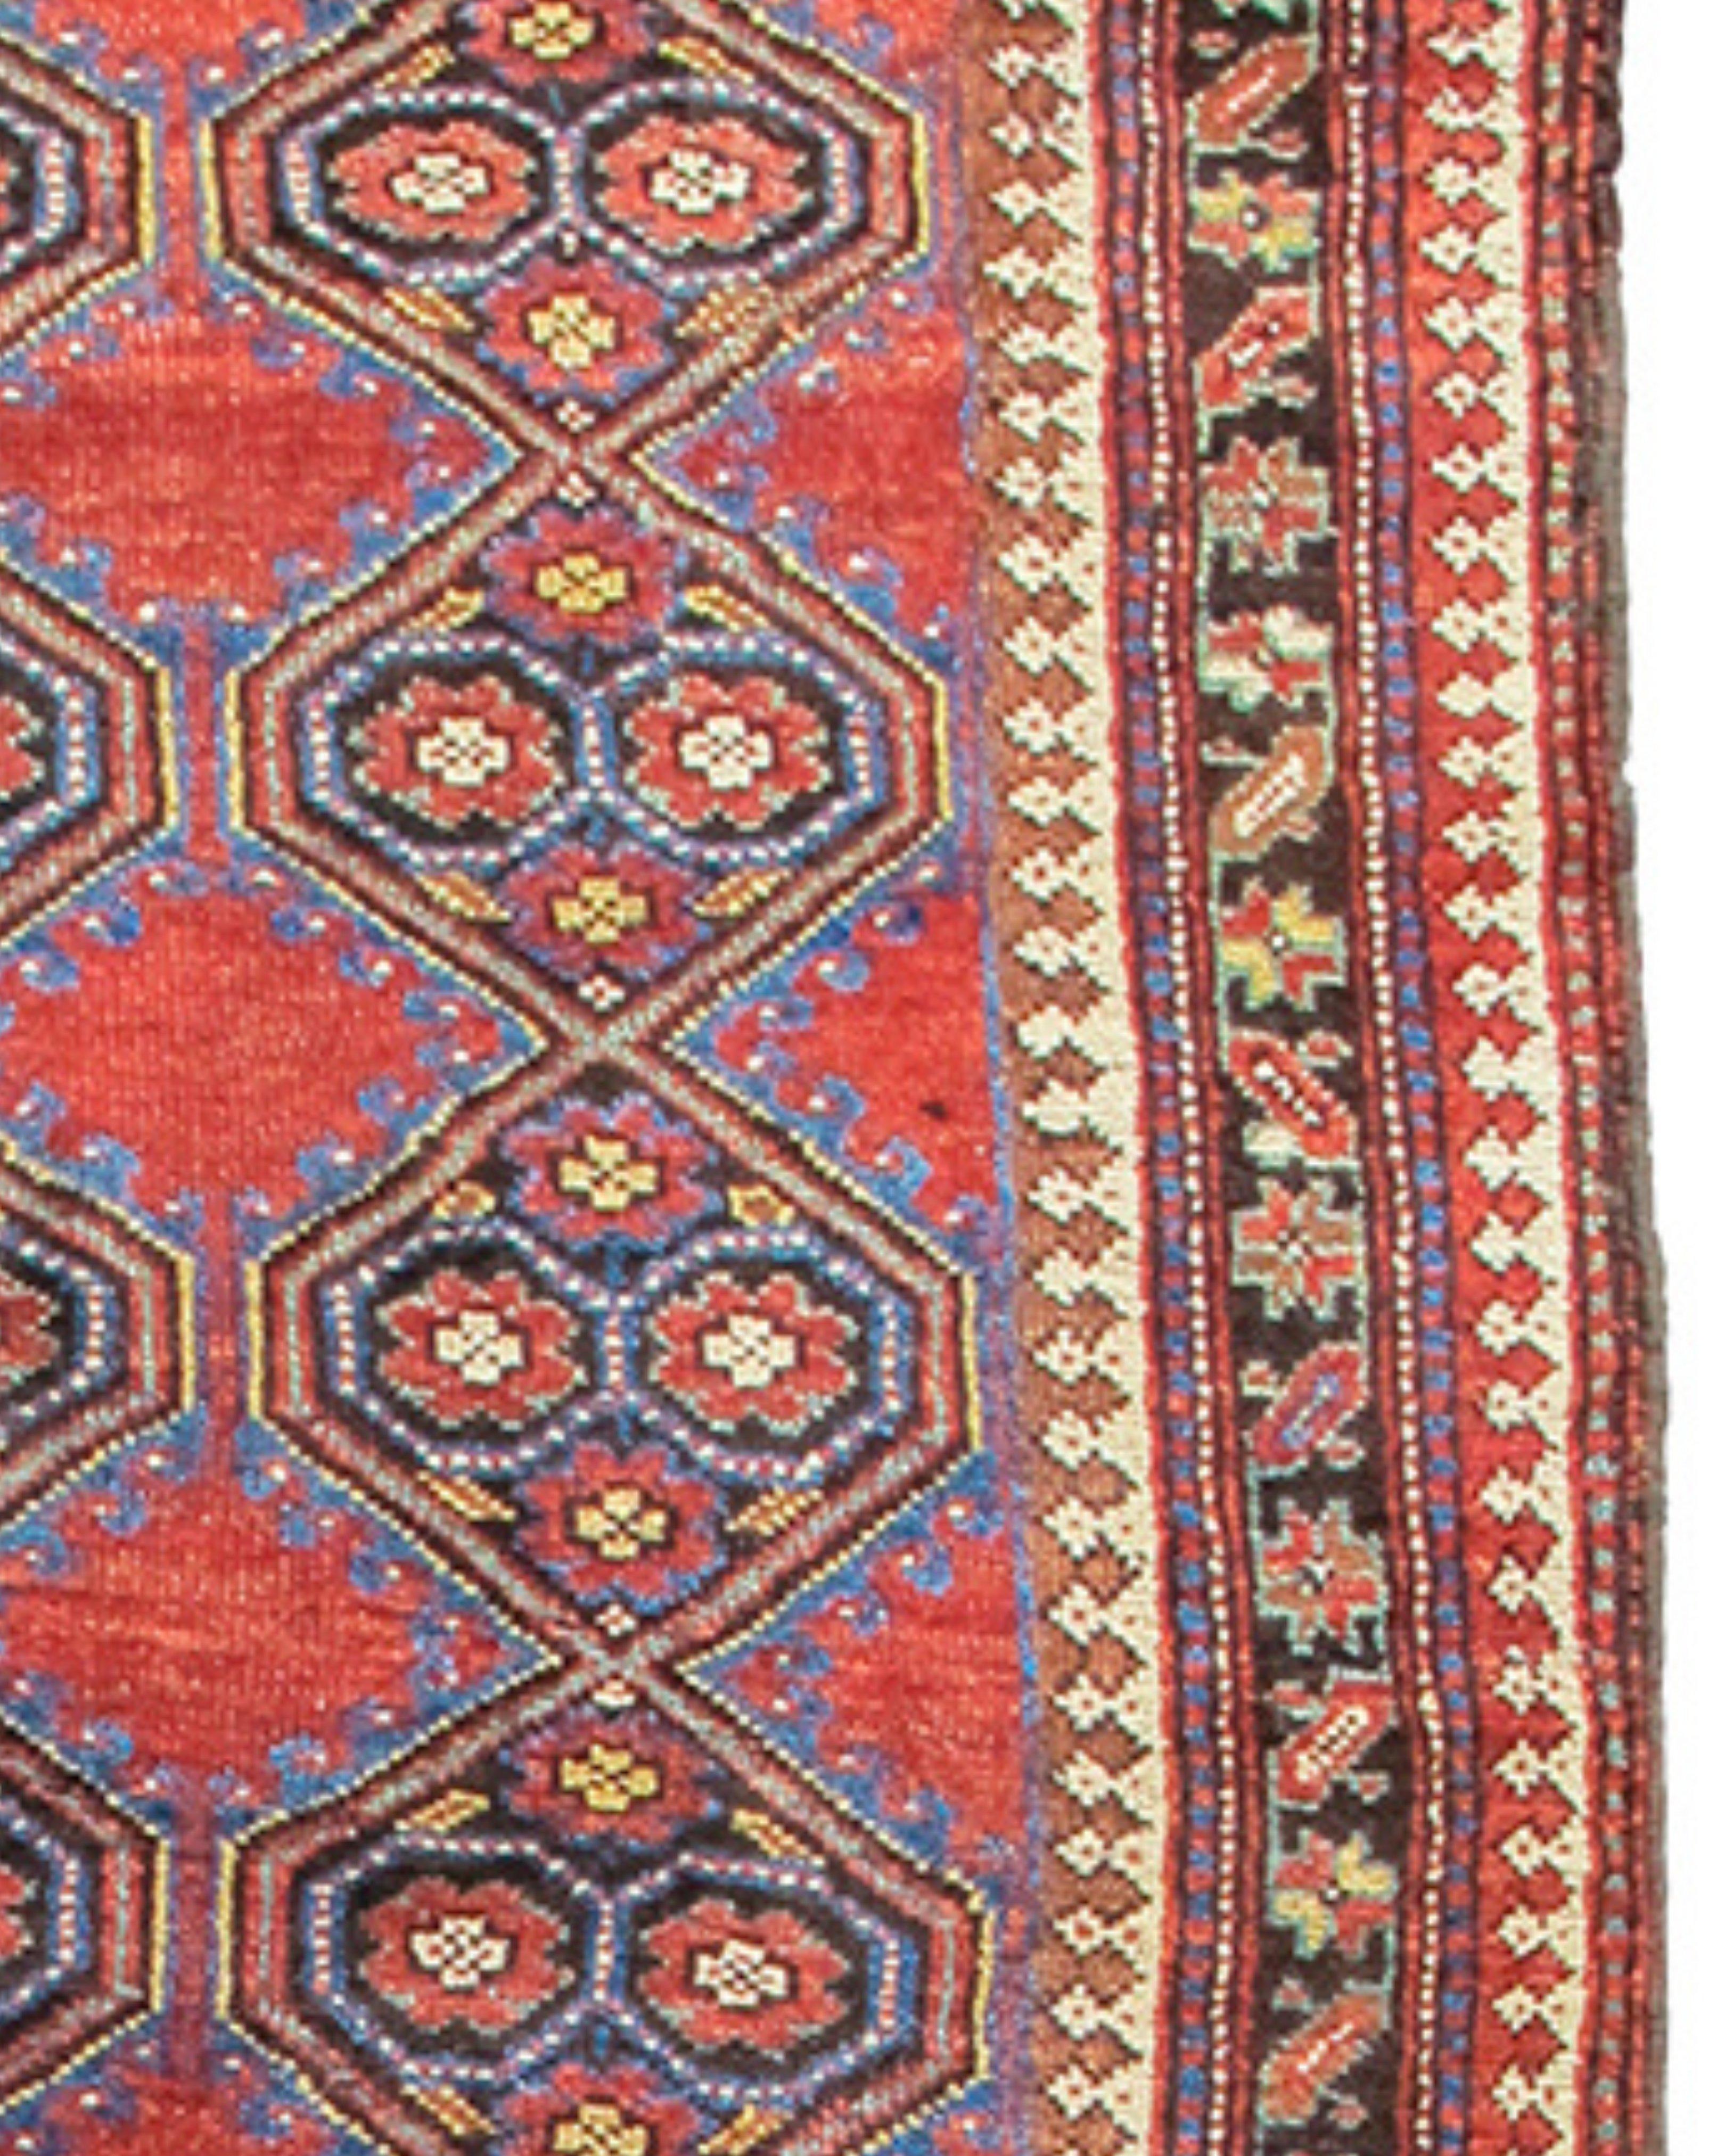 Antique Persian Kurdish Rug, Late 19th Century

Additional information:
Dimensions: 4'0